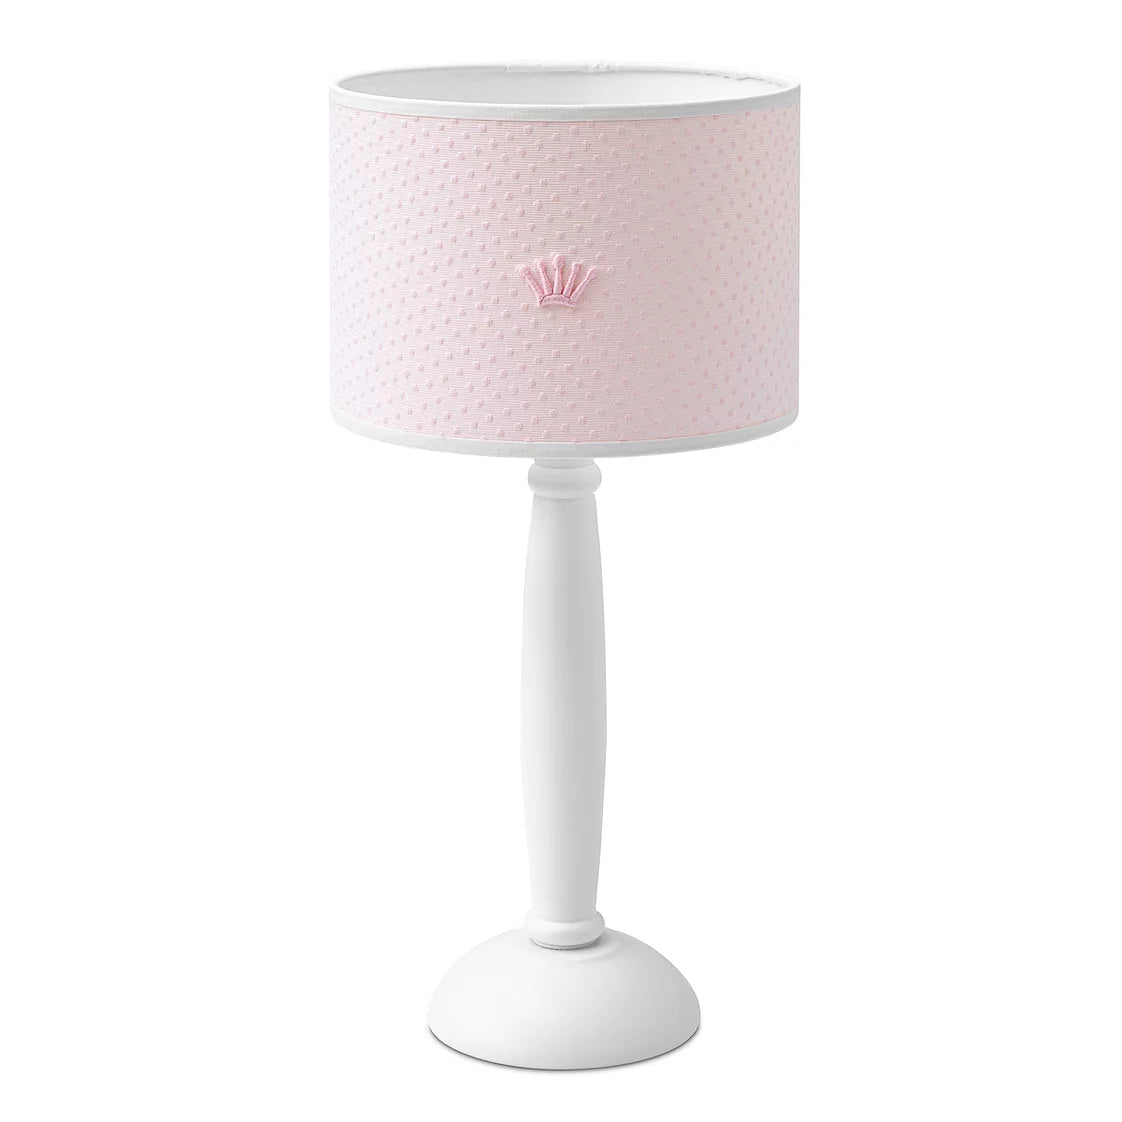 First Room and Decoration Table Lampshade - Pink